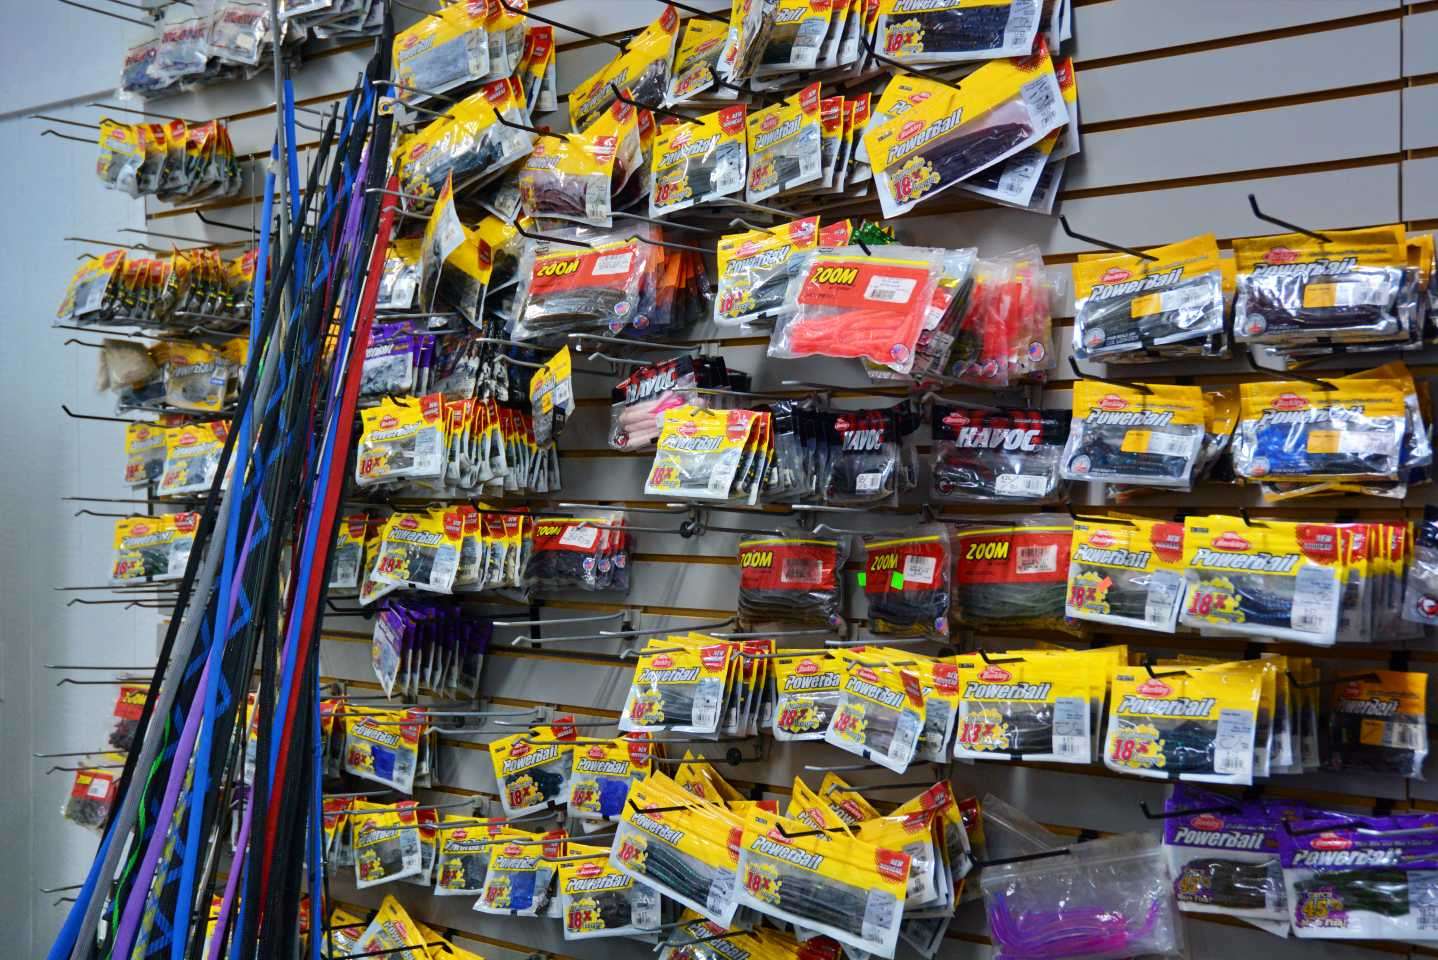 The wall is lined with Berkley PowerBait soft plastics.